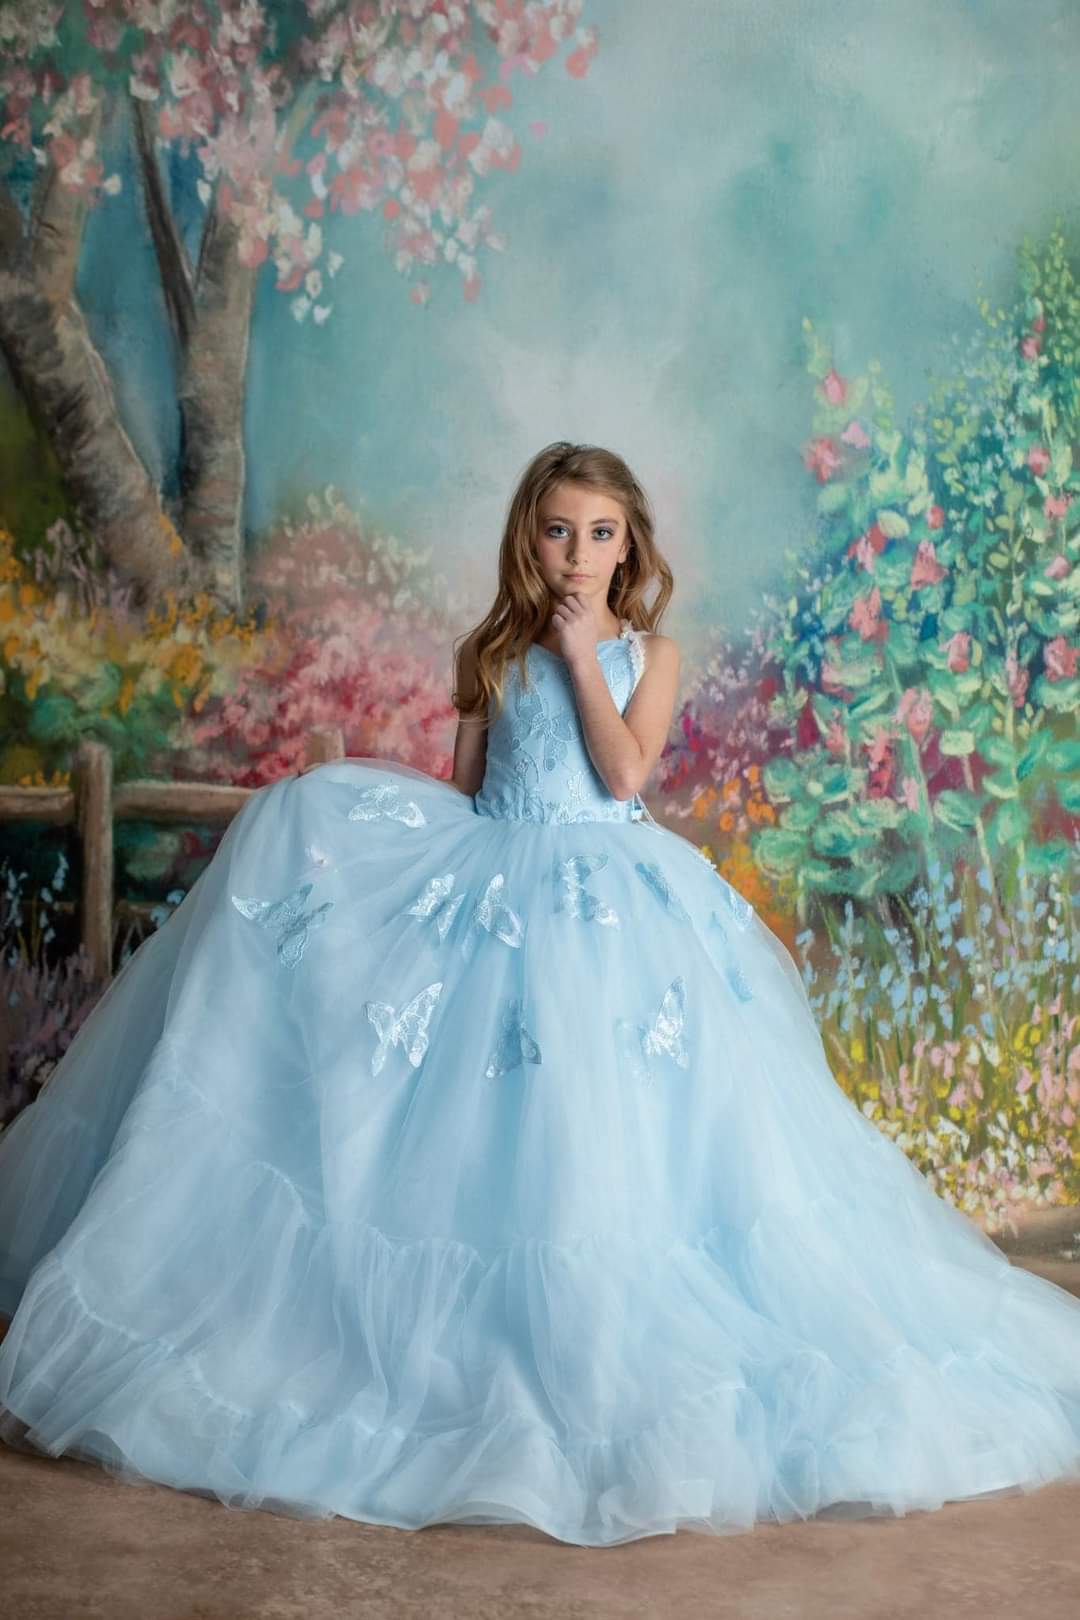 Buy Ywoow 13-14 Years Old Children's Gauze Princess Wedding Dress lace  Beaded Tail Dress Puff Dress Skirt Sky Blue at Amazon.in